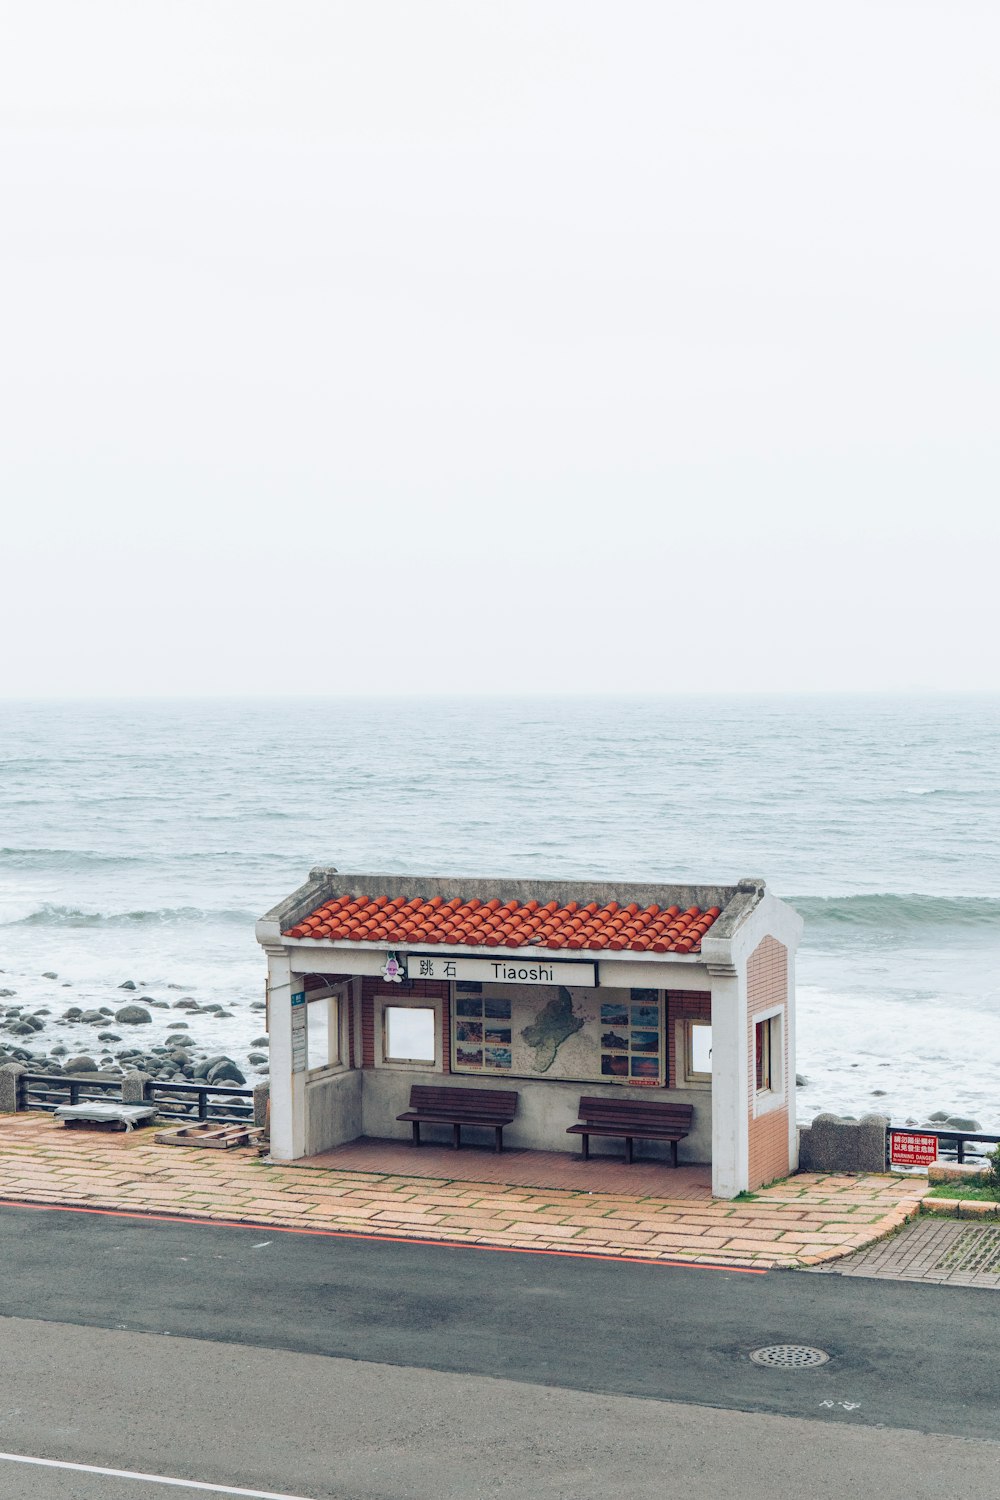 a small building sitting on the side of a road next to the ocean